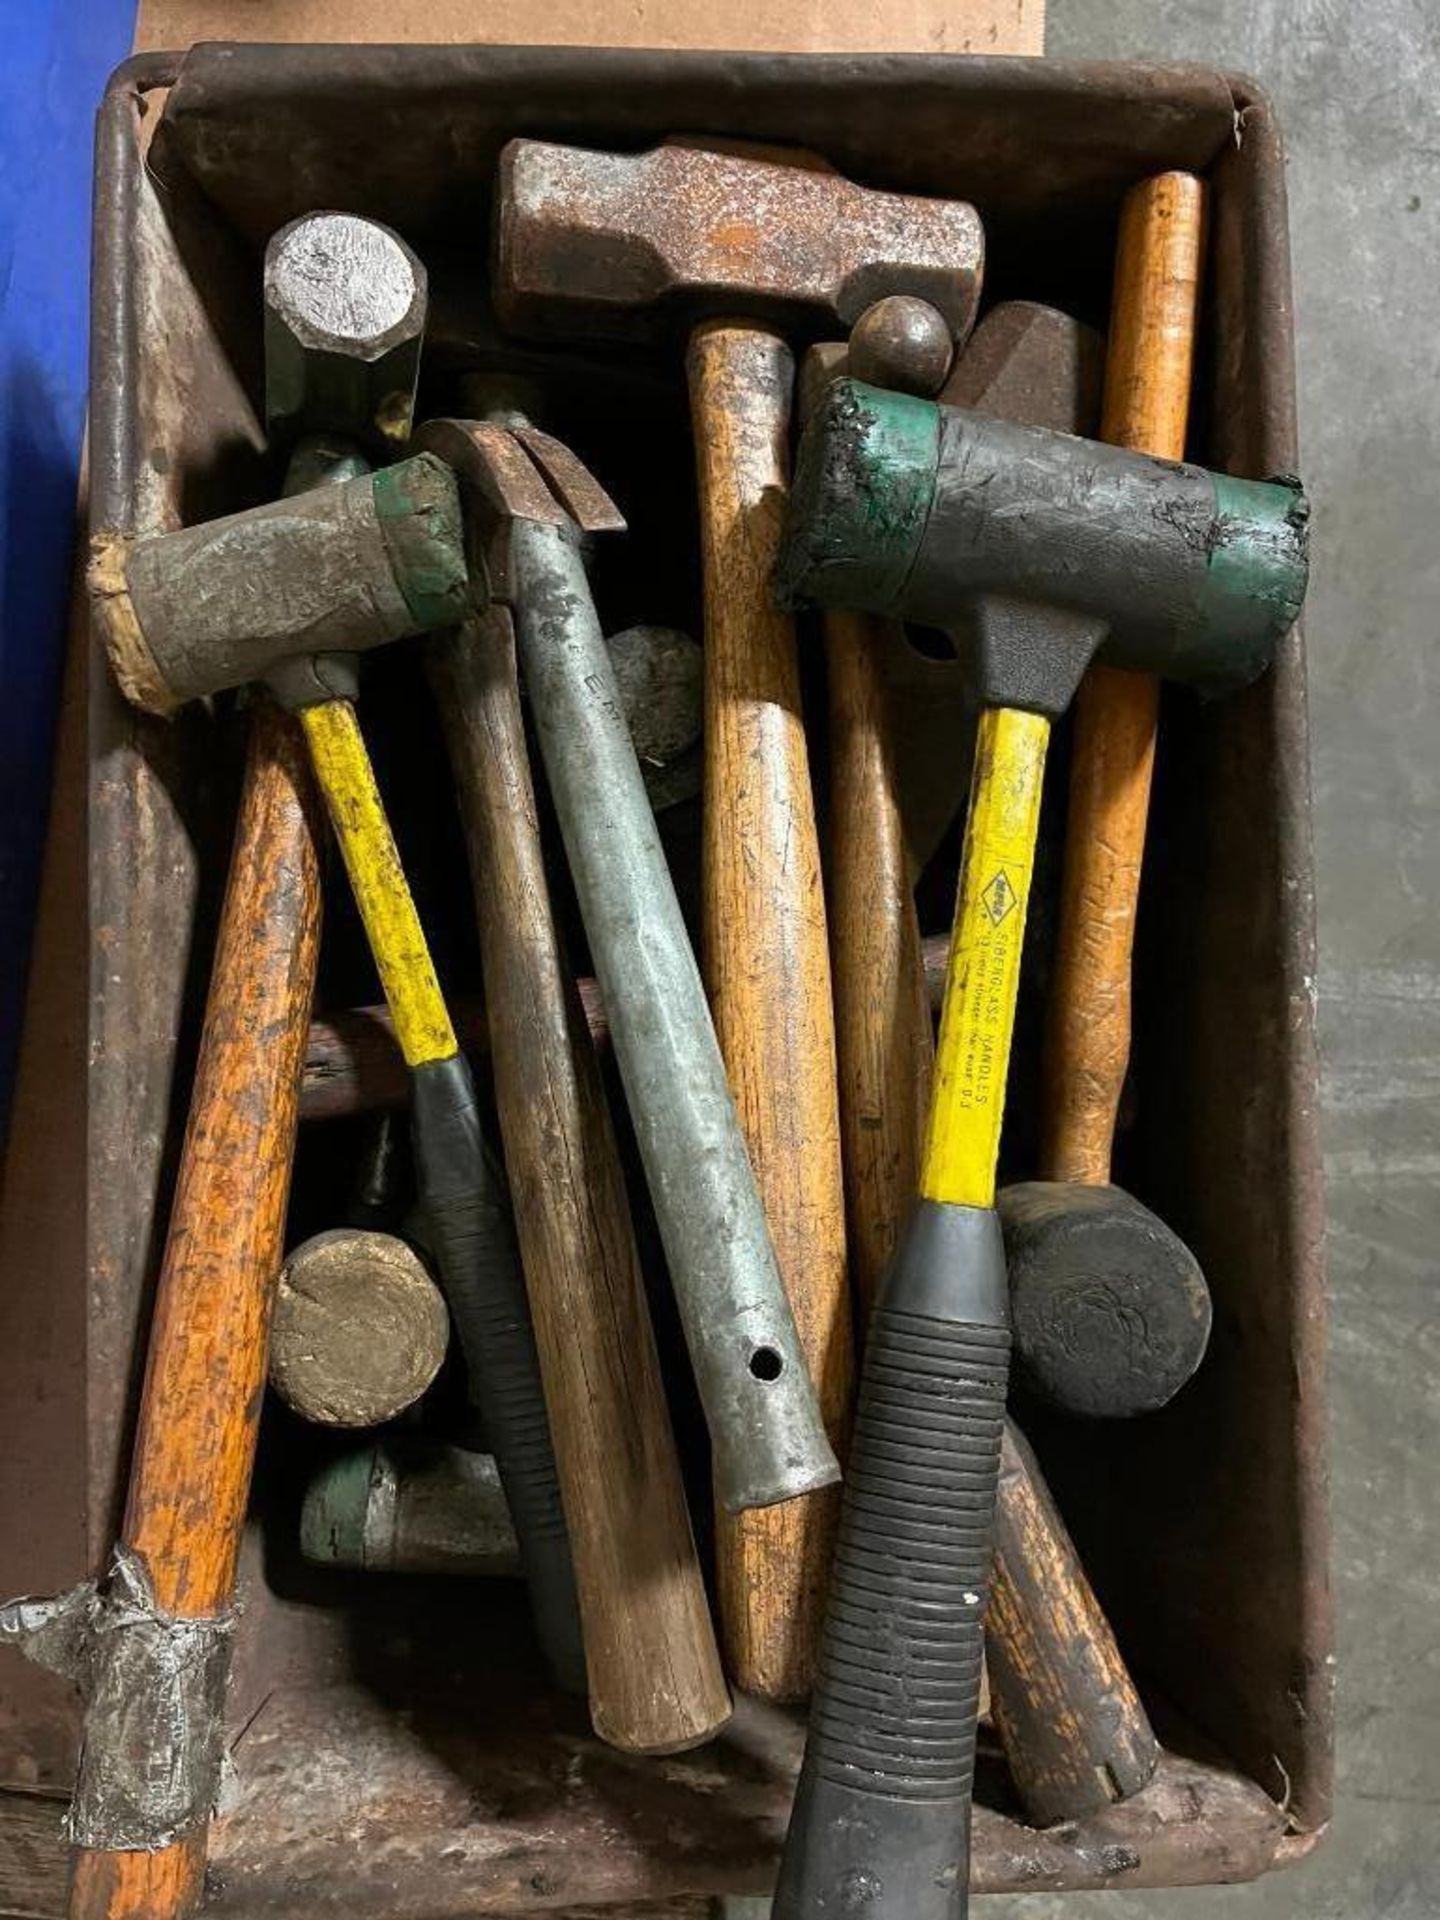 Bin of Hammers, Varied Shapes & Sizes